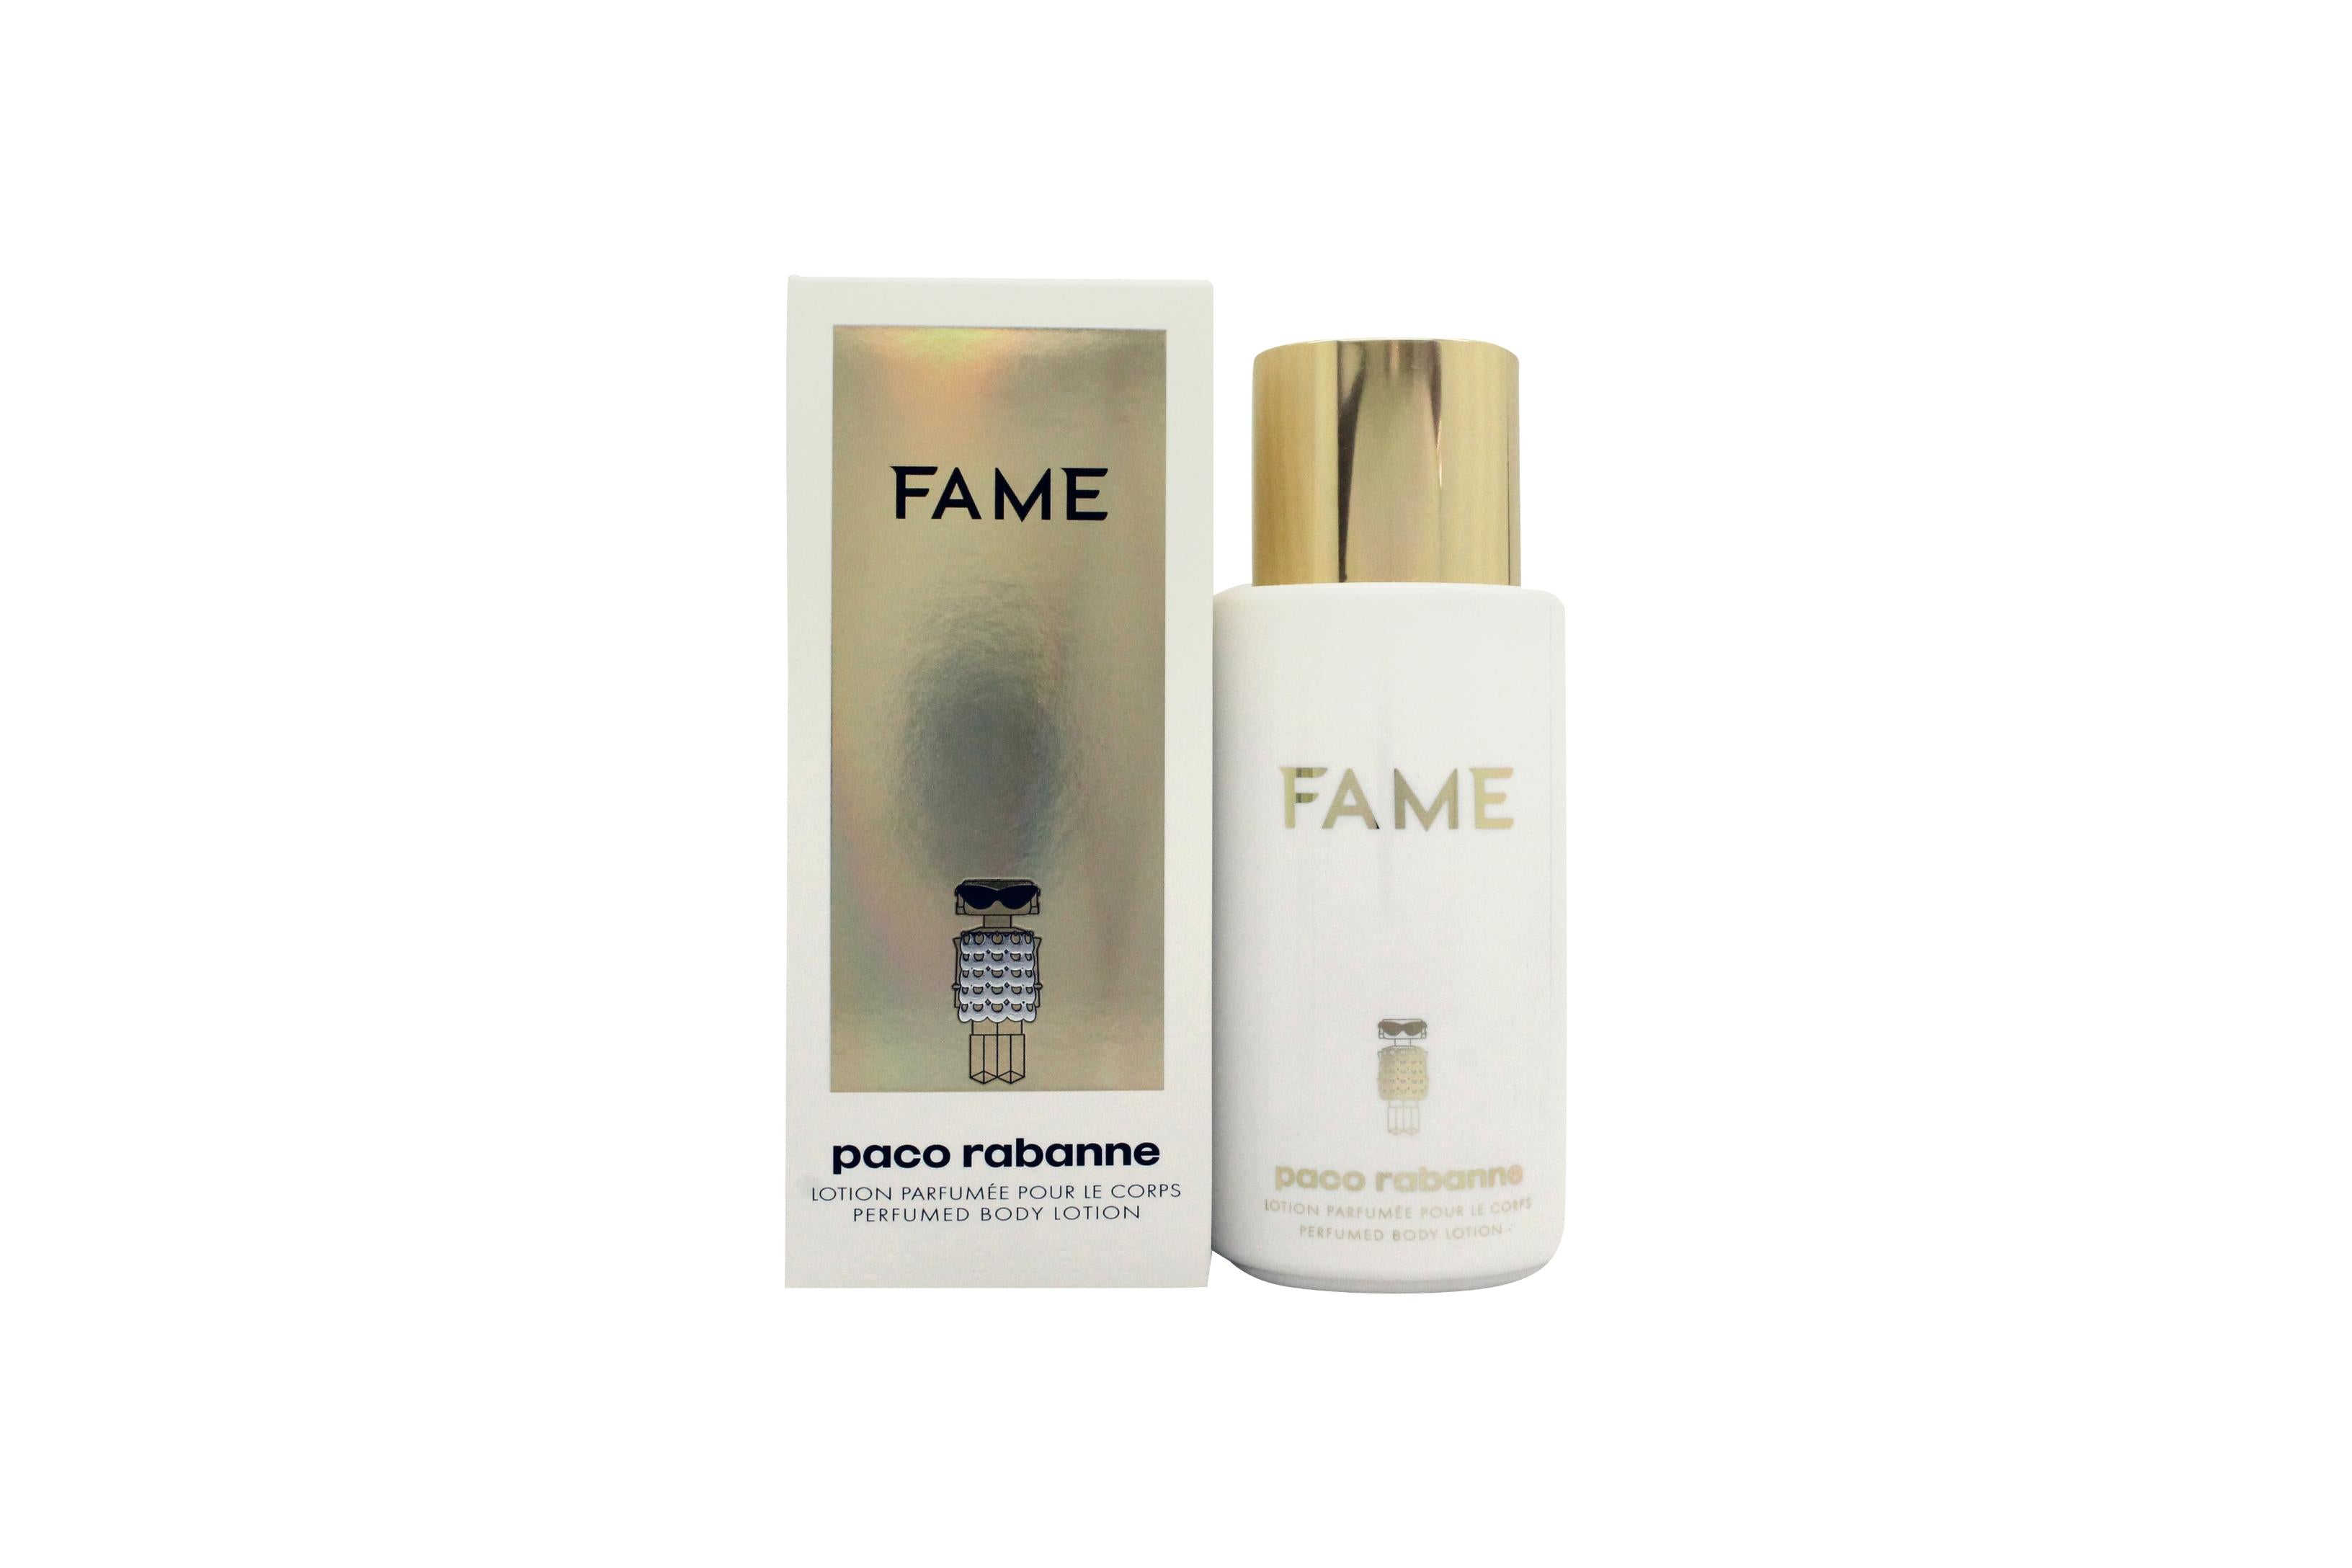 View Paco Rabanne Fame Perfumed Body Lotion 200ml information